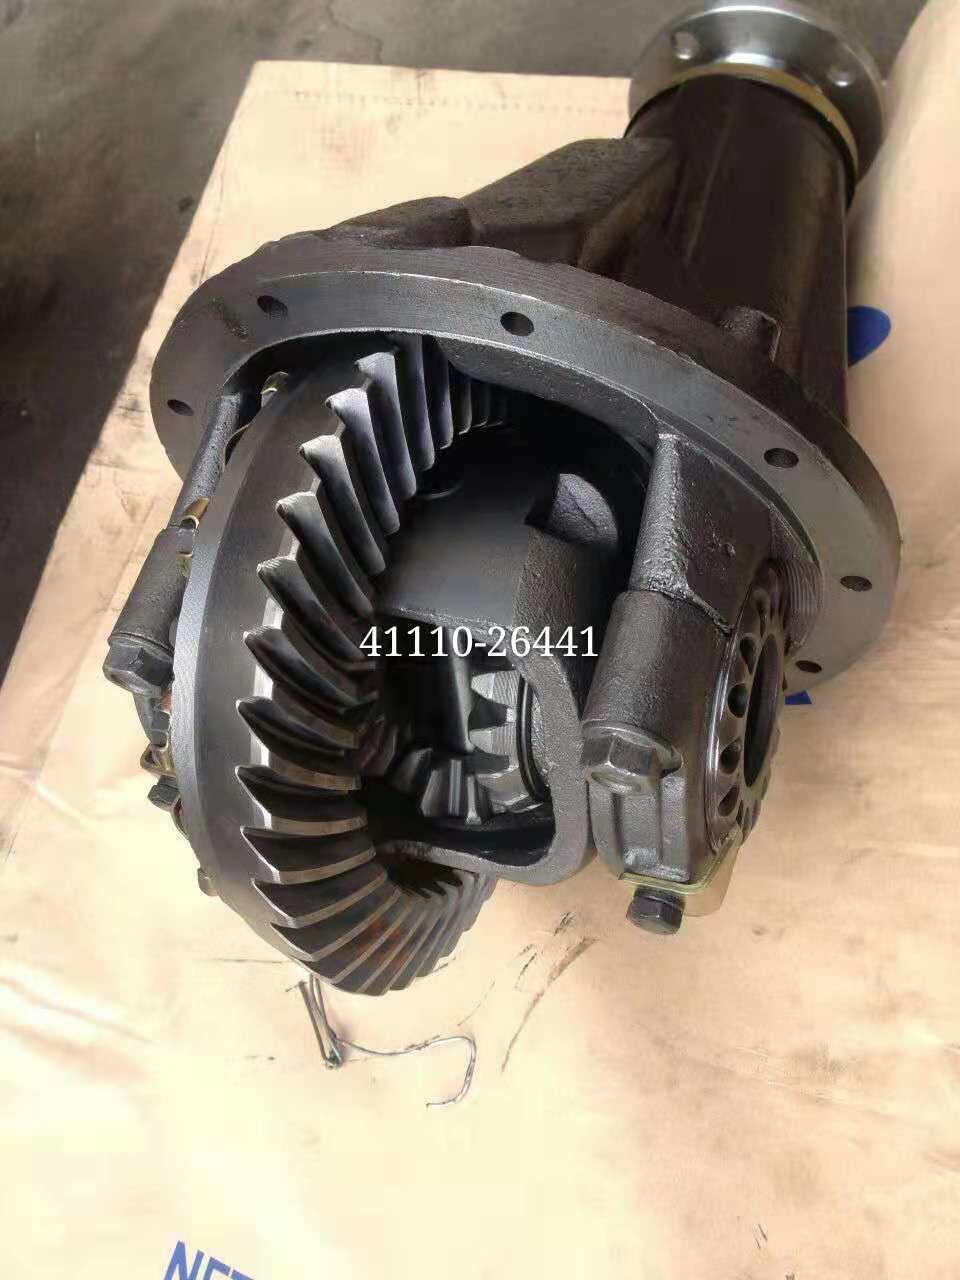 Differential for Toyota 22r, Hiace Ratio 4.55 (9: 41)